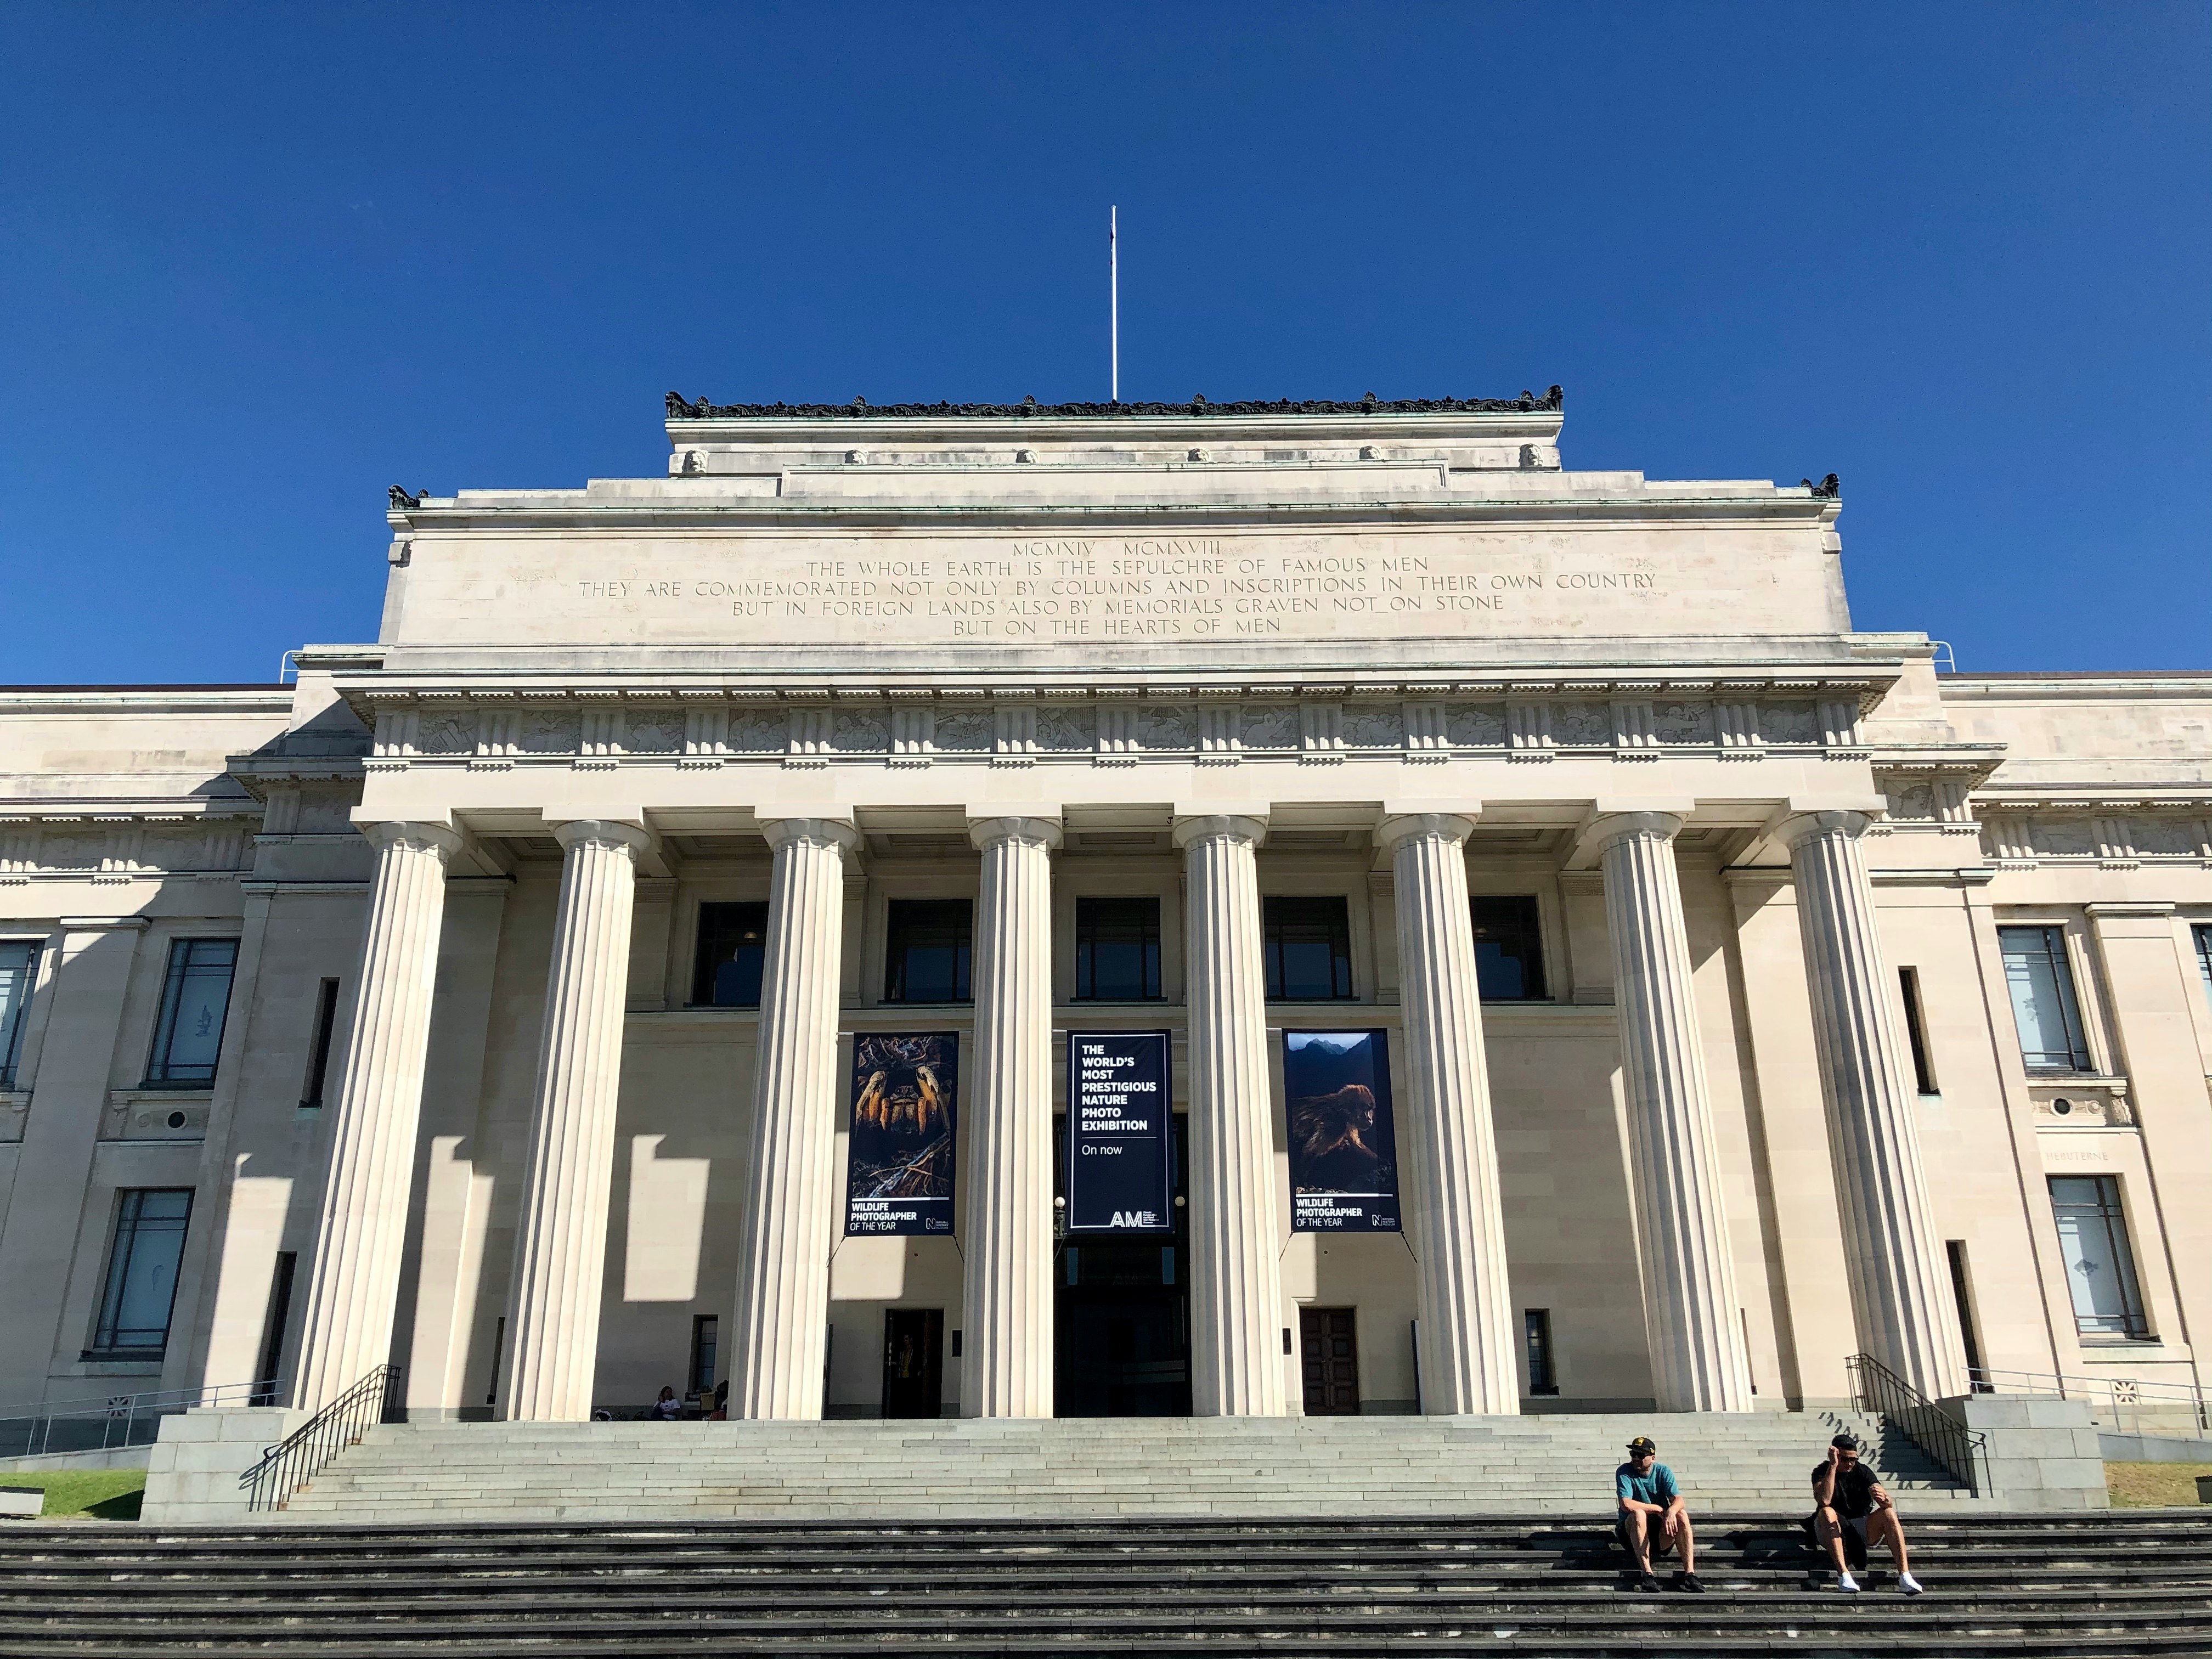 The front of the Auckland War Memorial Museum is the most grand and most memorable. It has eight direct columns which is almost a recreation of Greek Parthenon.